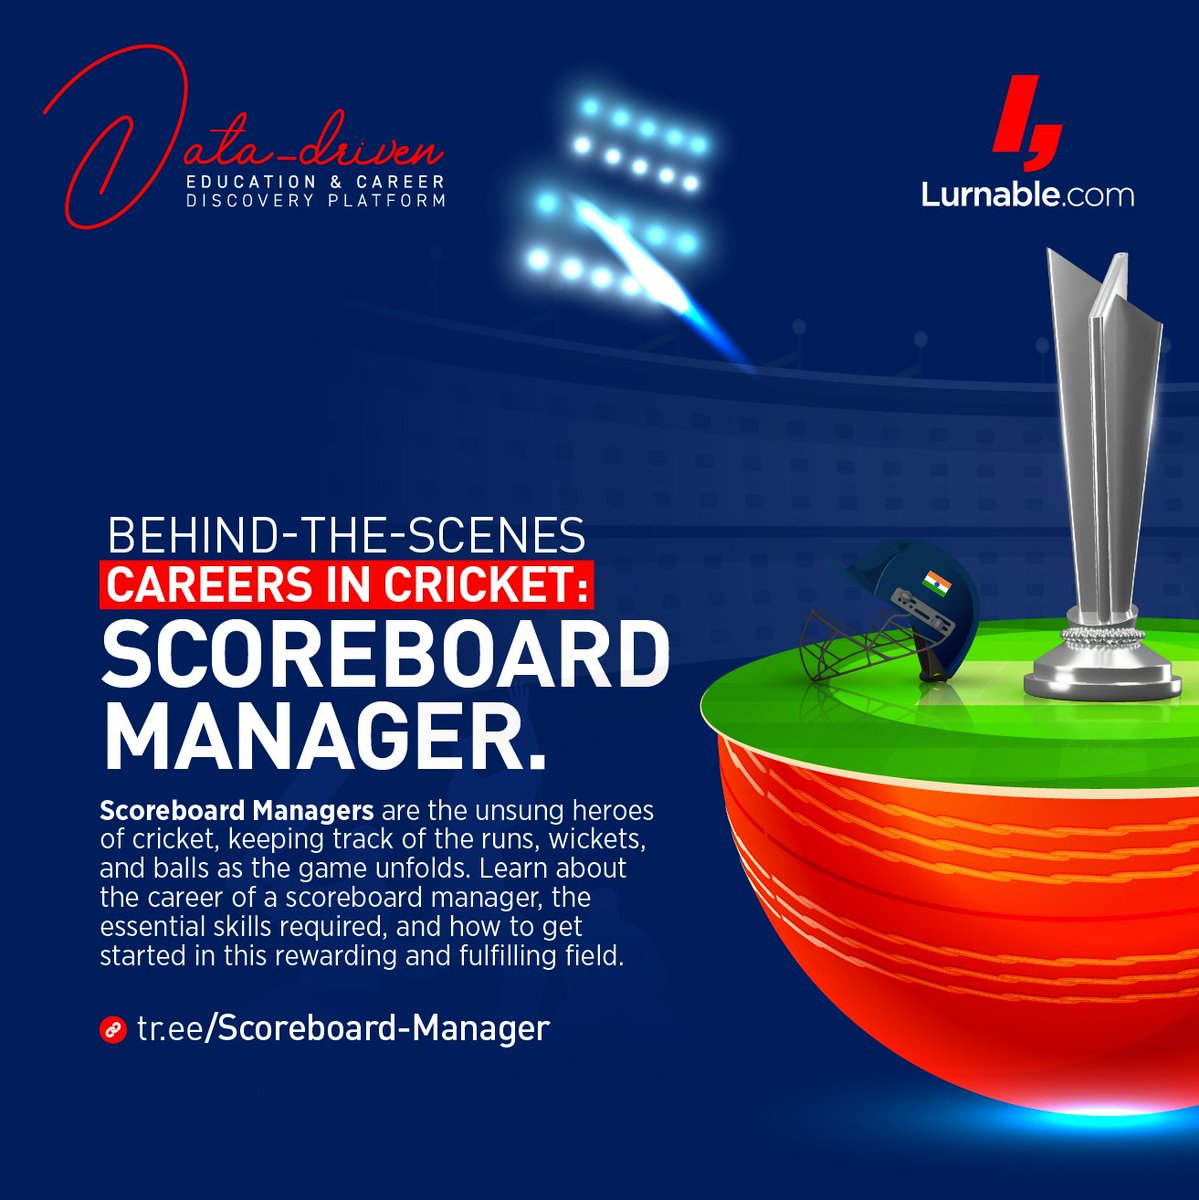 Scoreboard managers are the unsung heroes of cricket, keeping track of the runs, wickets, and balls as the game unfolds. 

#cricket #cricketcareer #cricketjobs  #scoreboard #scoreboards #offfield #cricketlovers #sportsanalytics #sportsanalysis #eventmanager